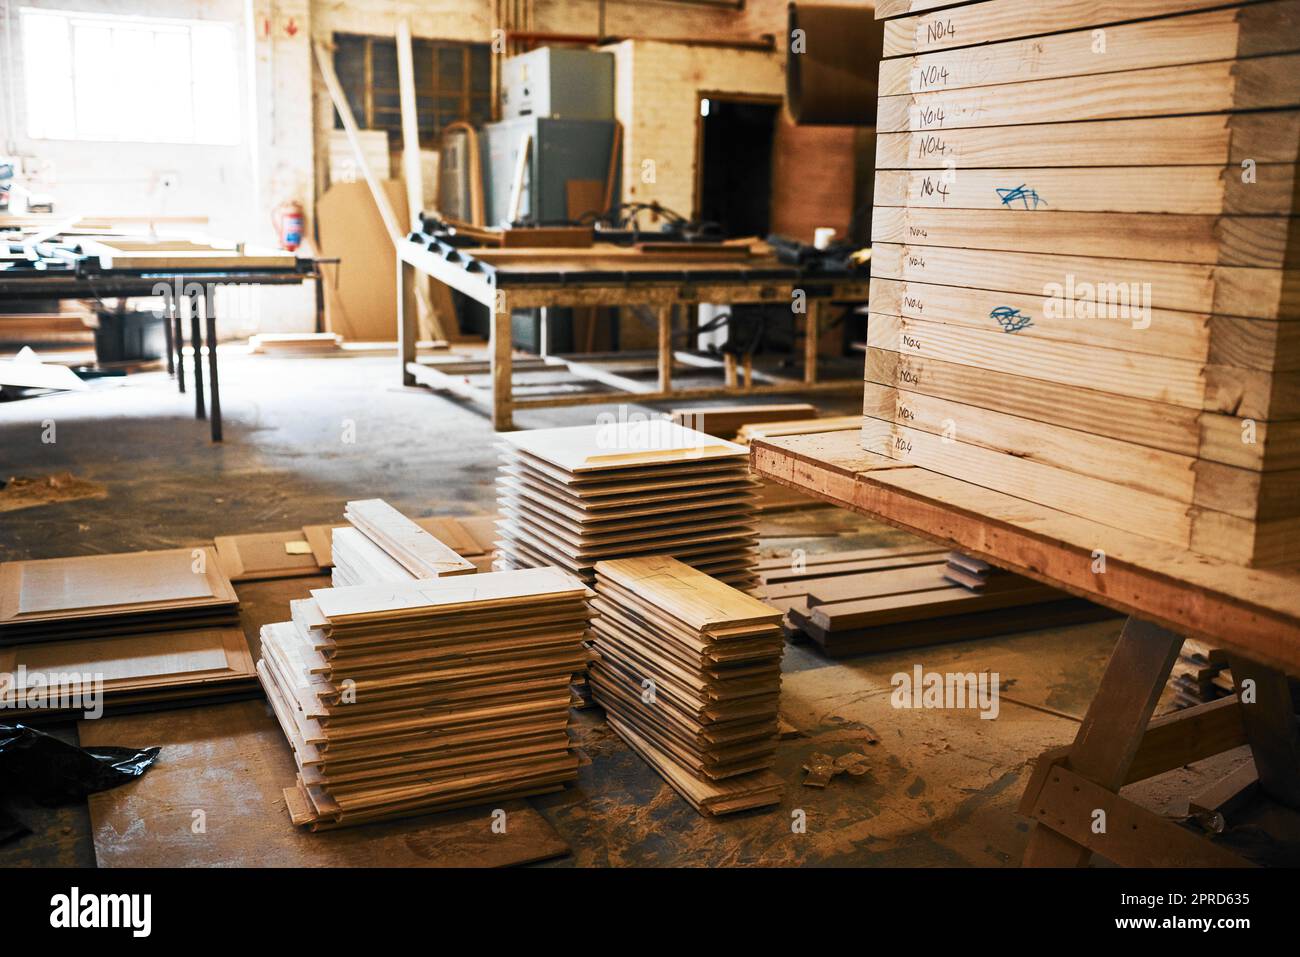 Were stocked up on the finest wood in the industry. Still life shot of piles of wood stacked inside a carpentry workshop. Stock Photo